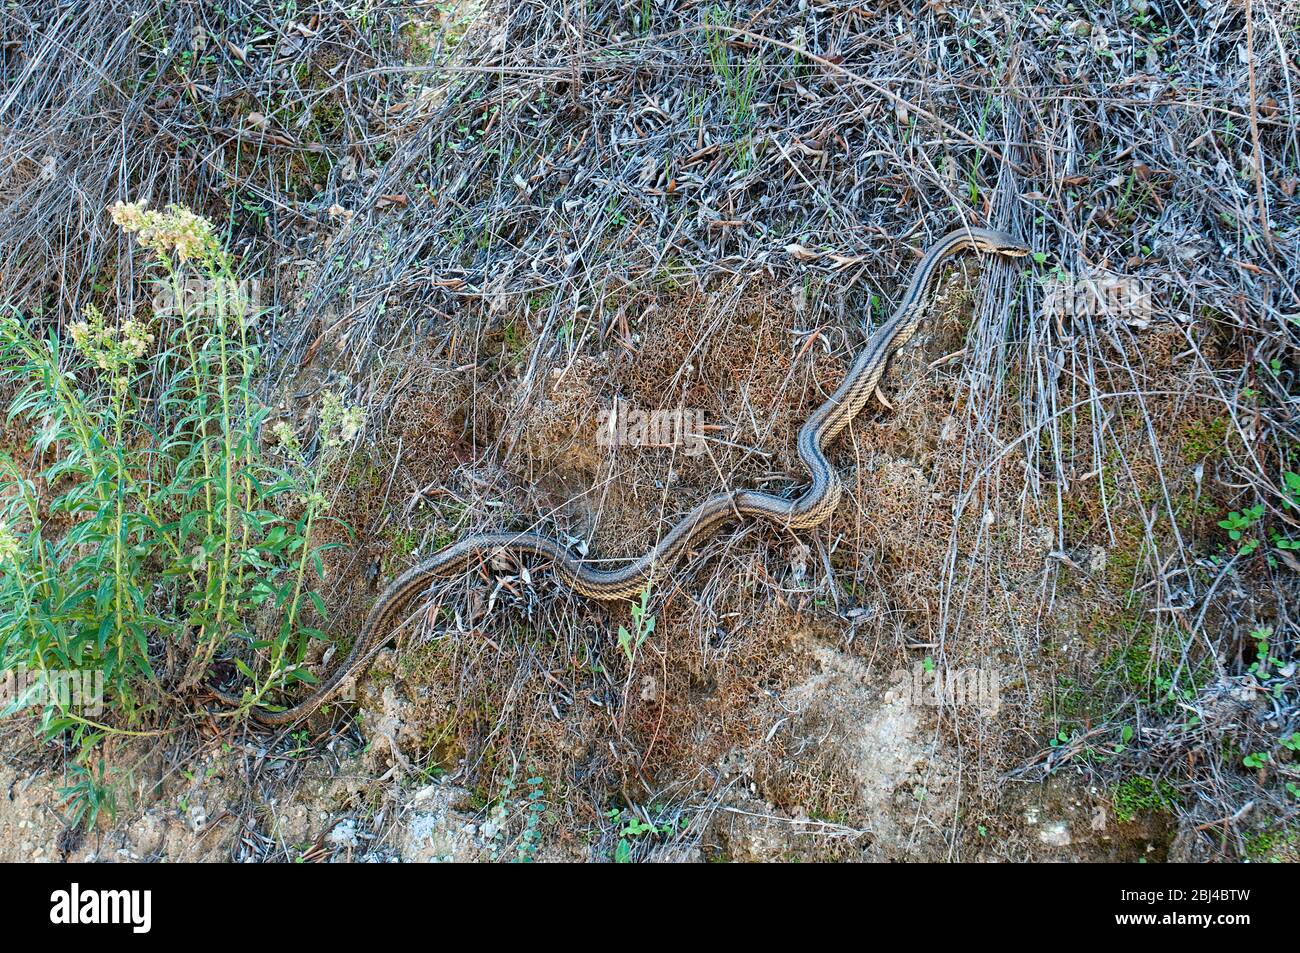 Four-lined snake, non-venomous species camouflaged in foliage, Corfu, Greece Stock Photo